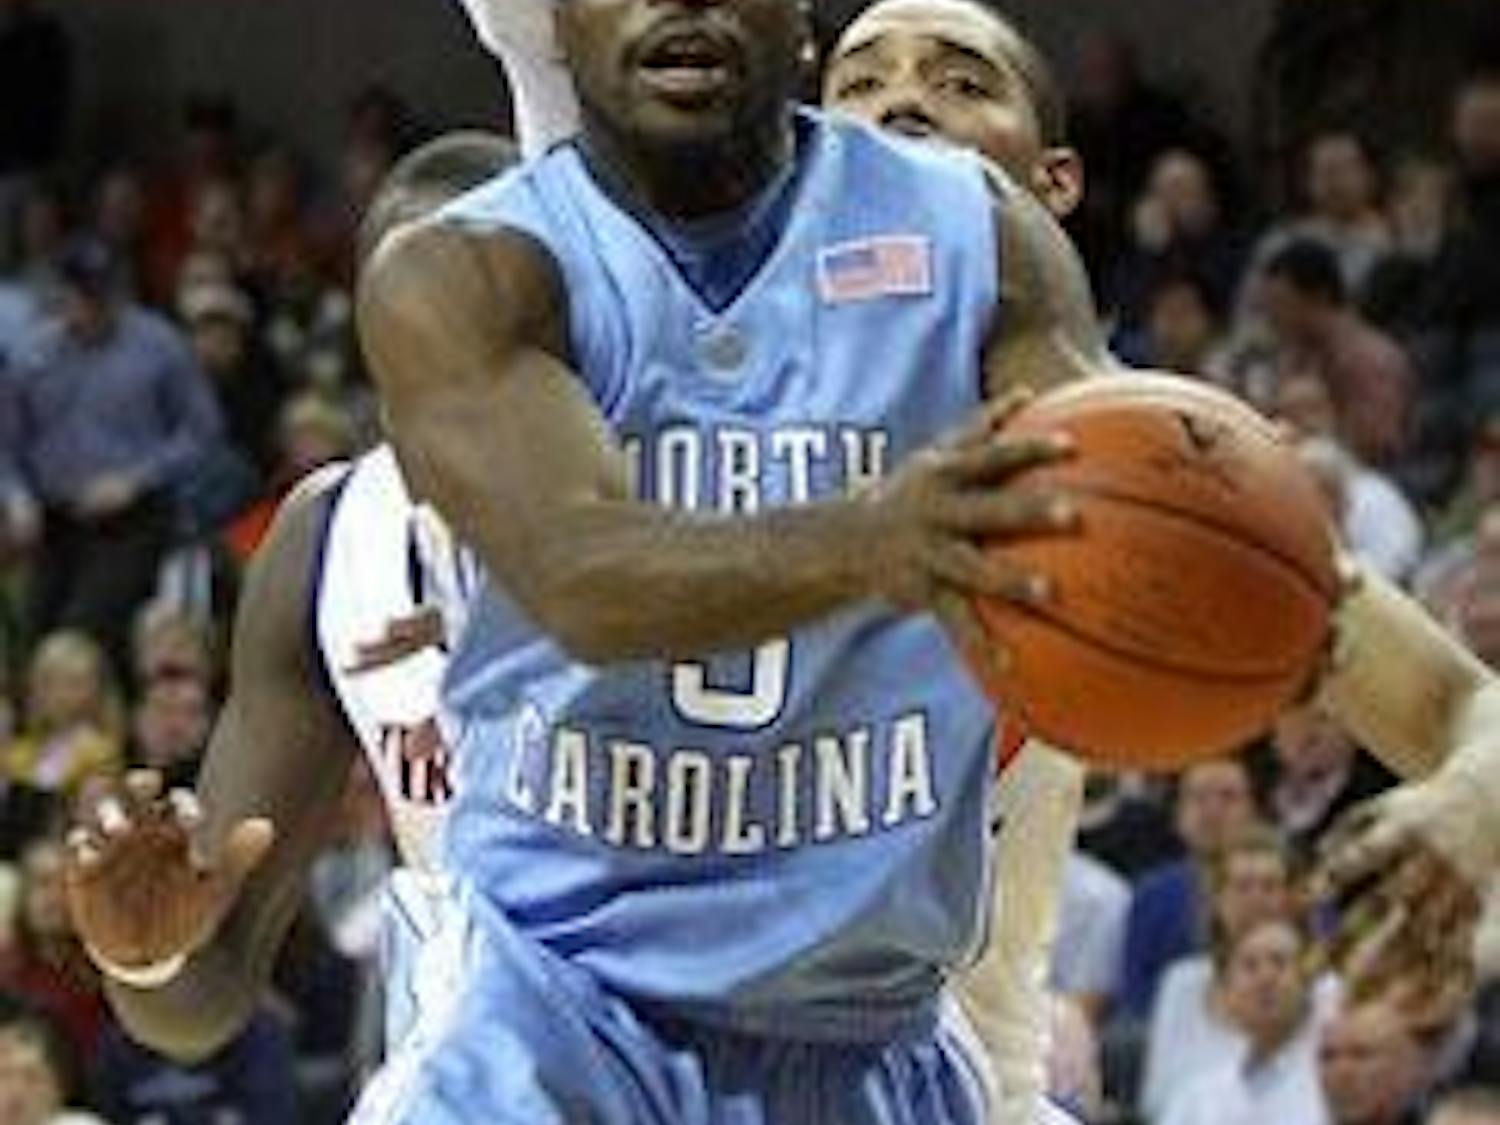 Ty Lawson shot an efficient 7-for-10 from the field for 19 points and added nine assists against Virginia in Charlottesville in a 2009 regular season game. (DTH File/Andrew Dye)